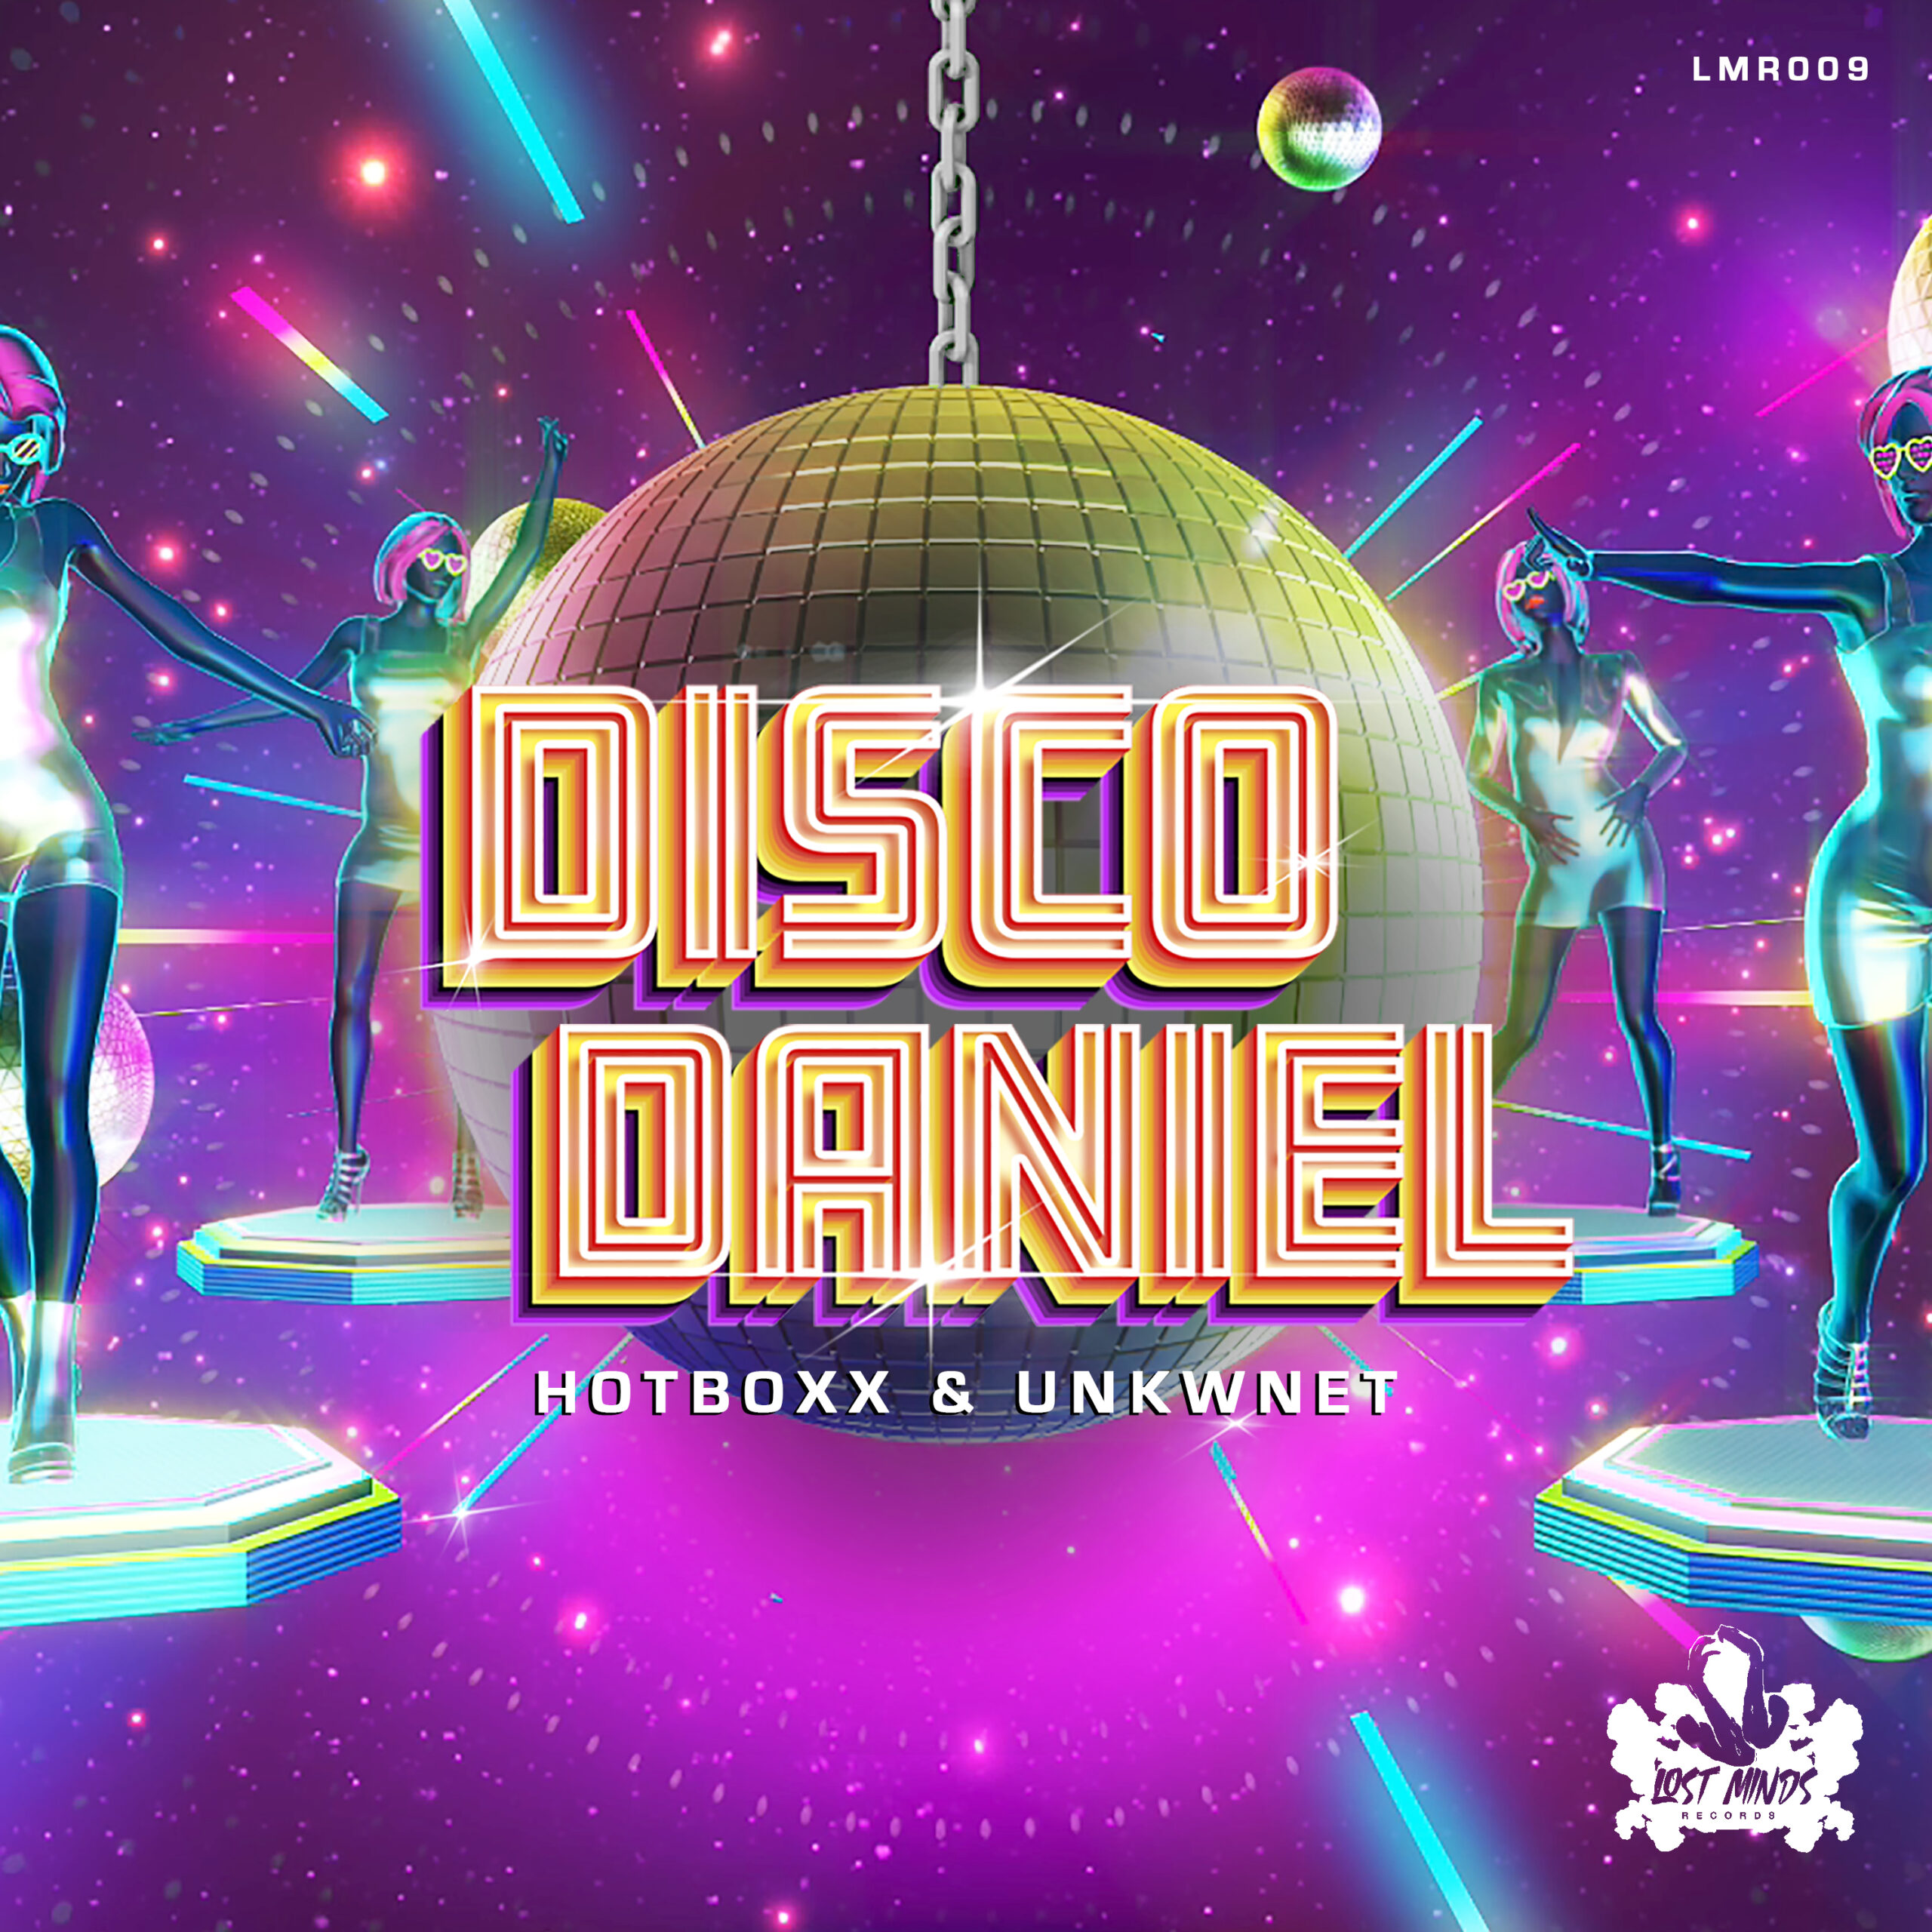 ‘Disco Daniel’: Hotboxx and Unkwnet Fuse Styles for High-Impact Tech House Release